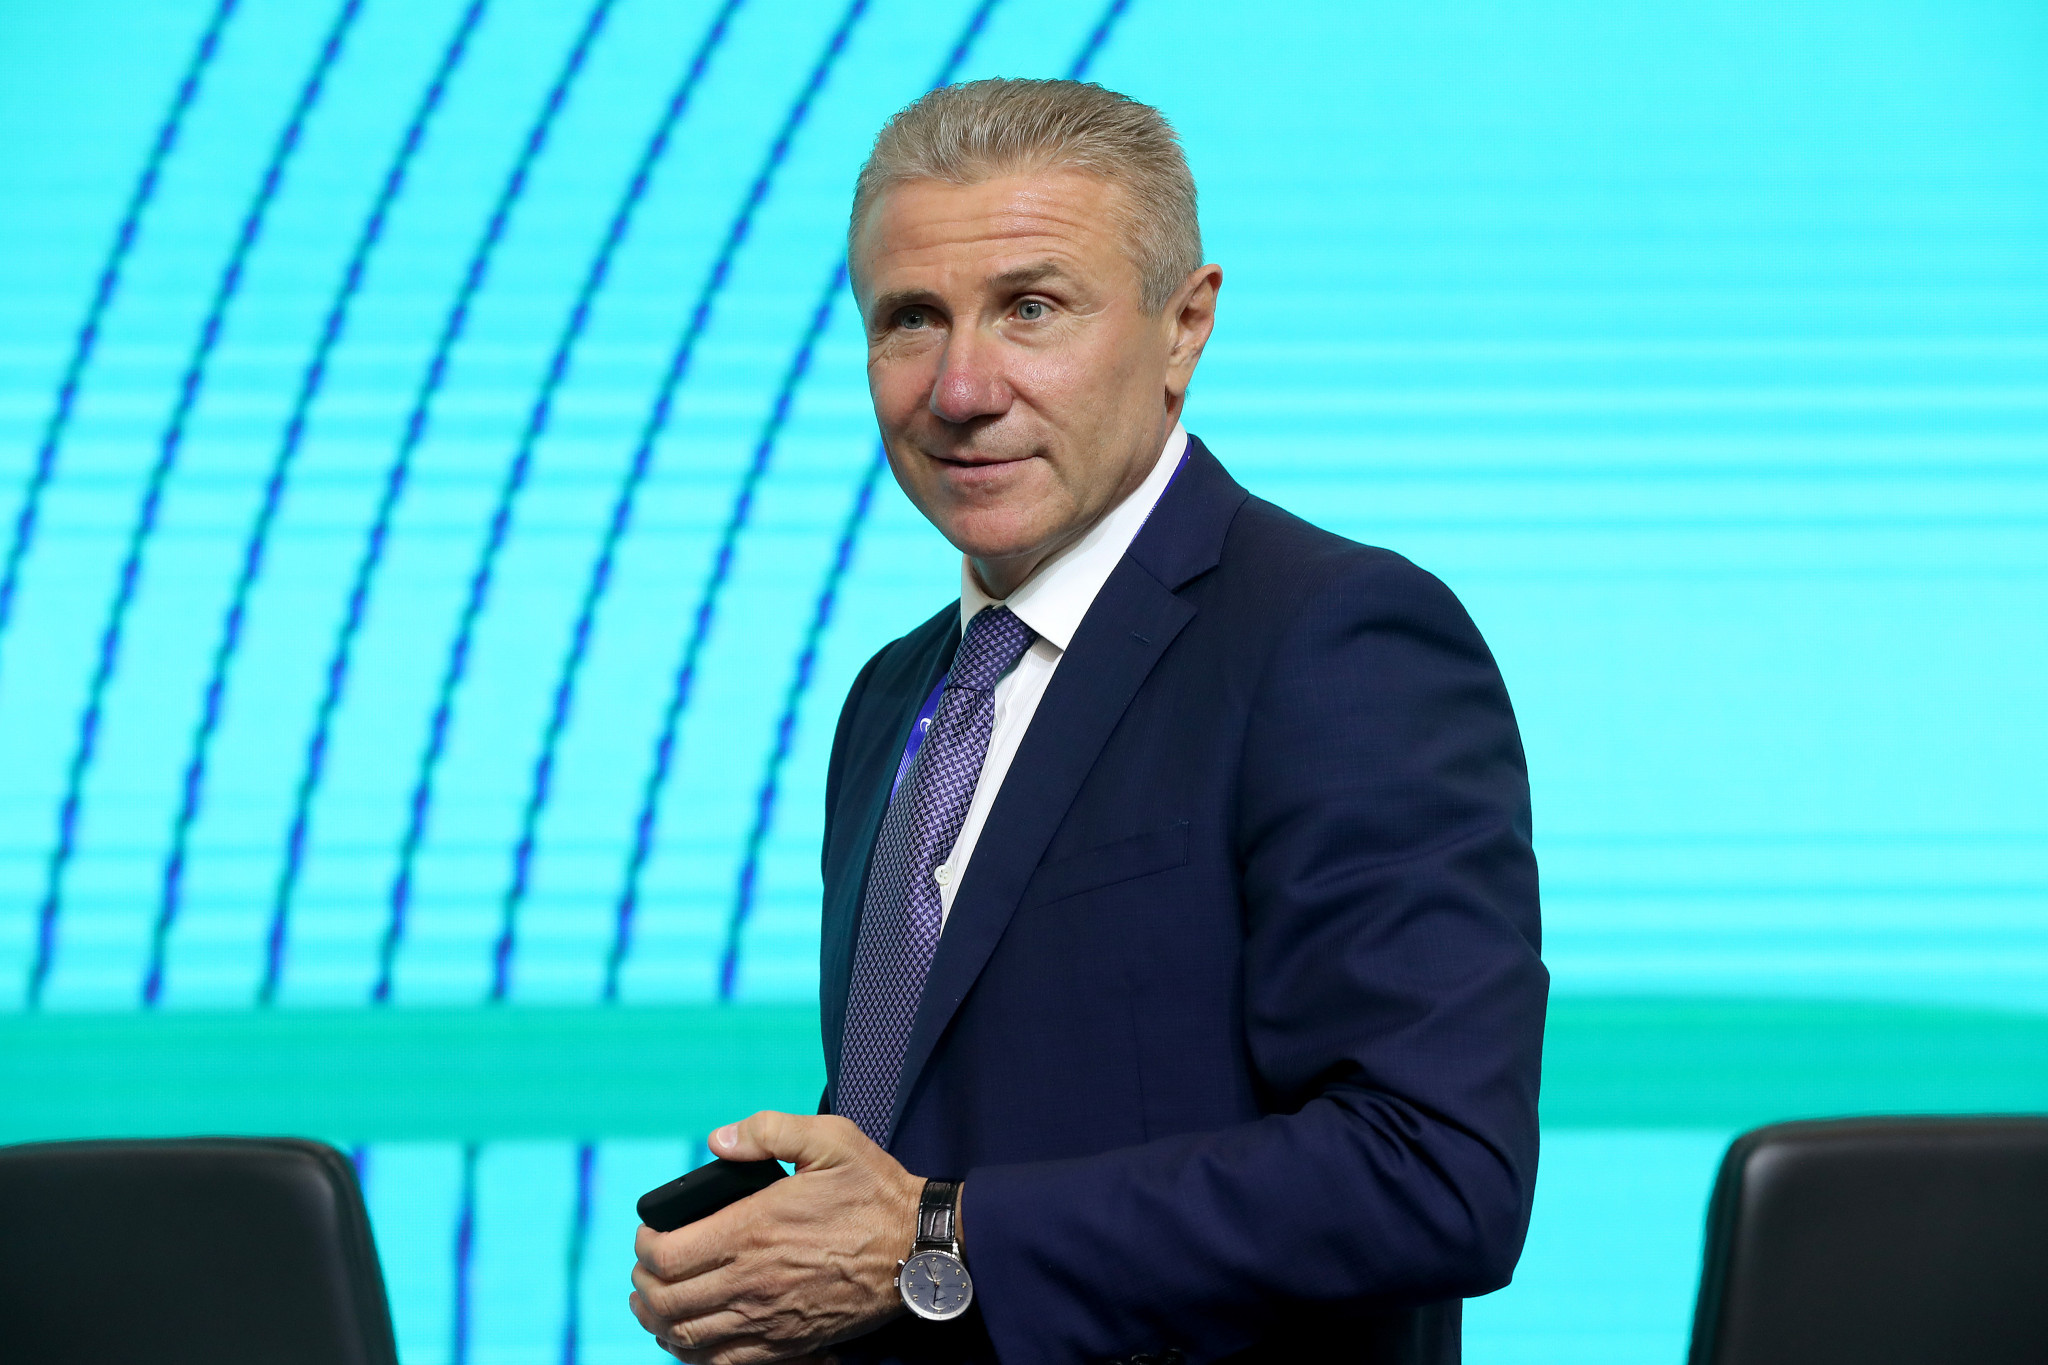 Sergey Bubka was among the World Athletics Council members participating via teleconference following travel restrictions ©Getty Images